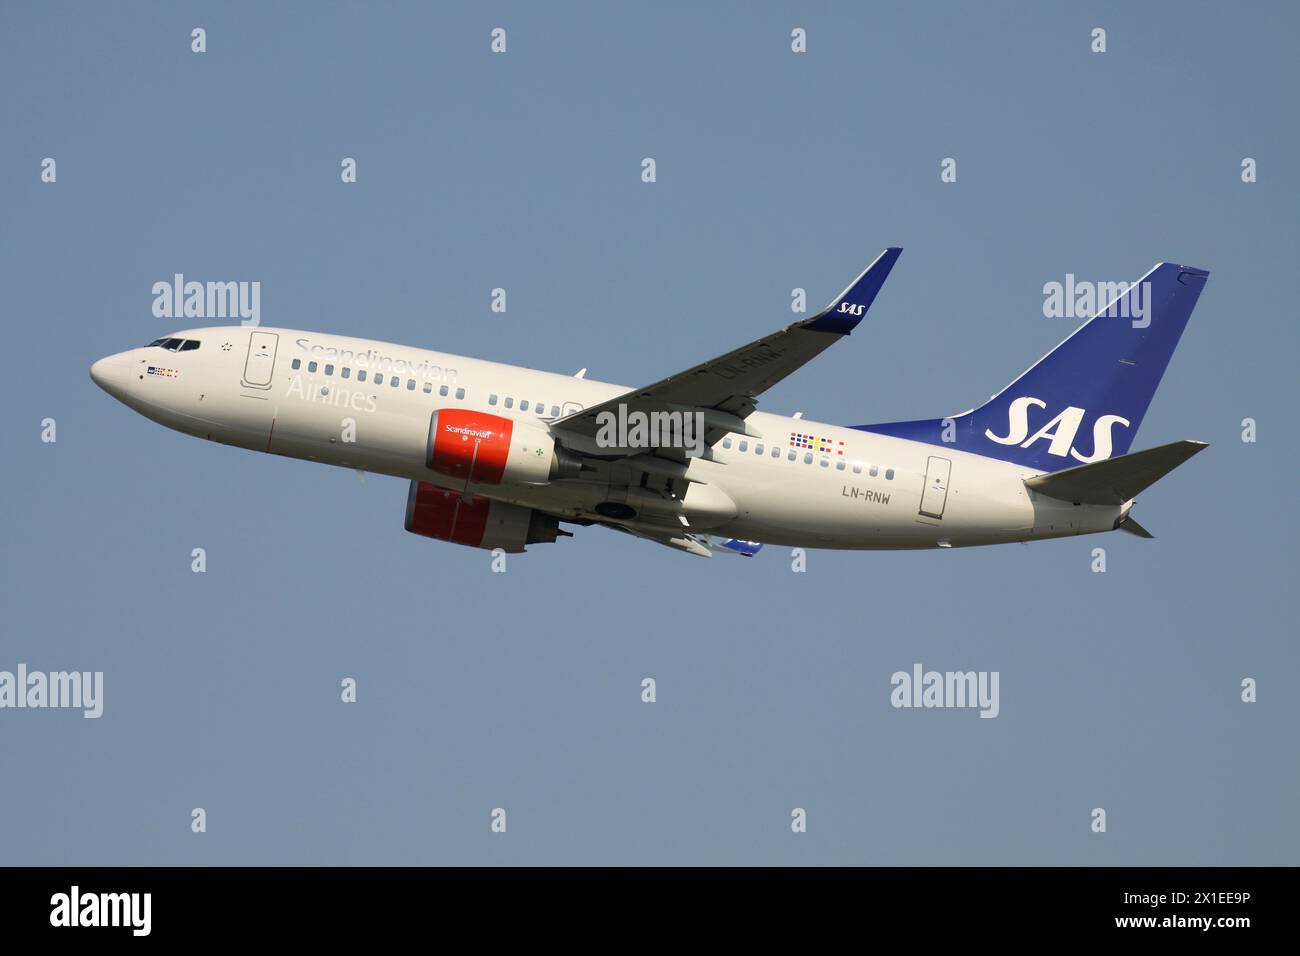 Scandinavian Airlines SAS Boeing 737-700 with registration LN-RNW just airborne at Dusseldorf Airport Stock Photo